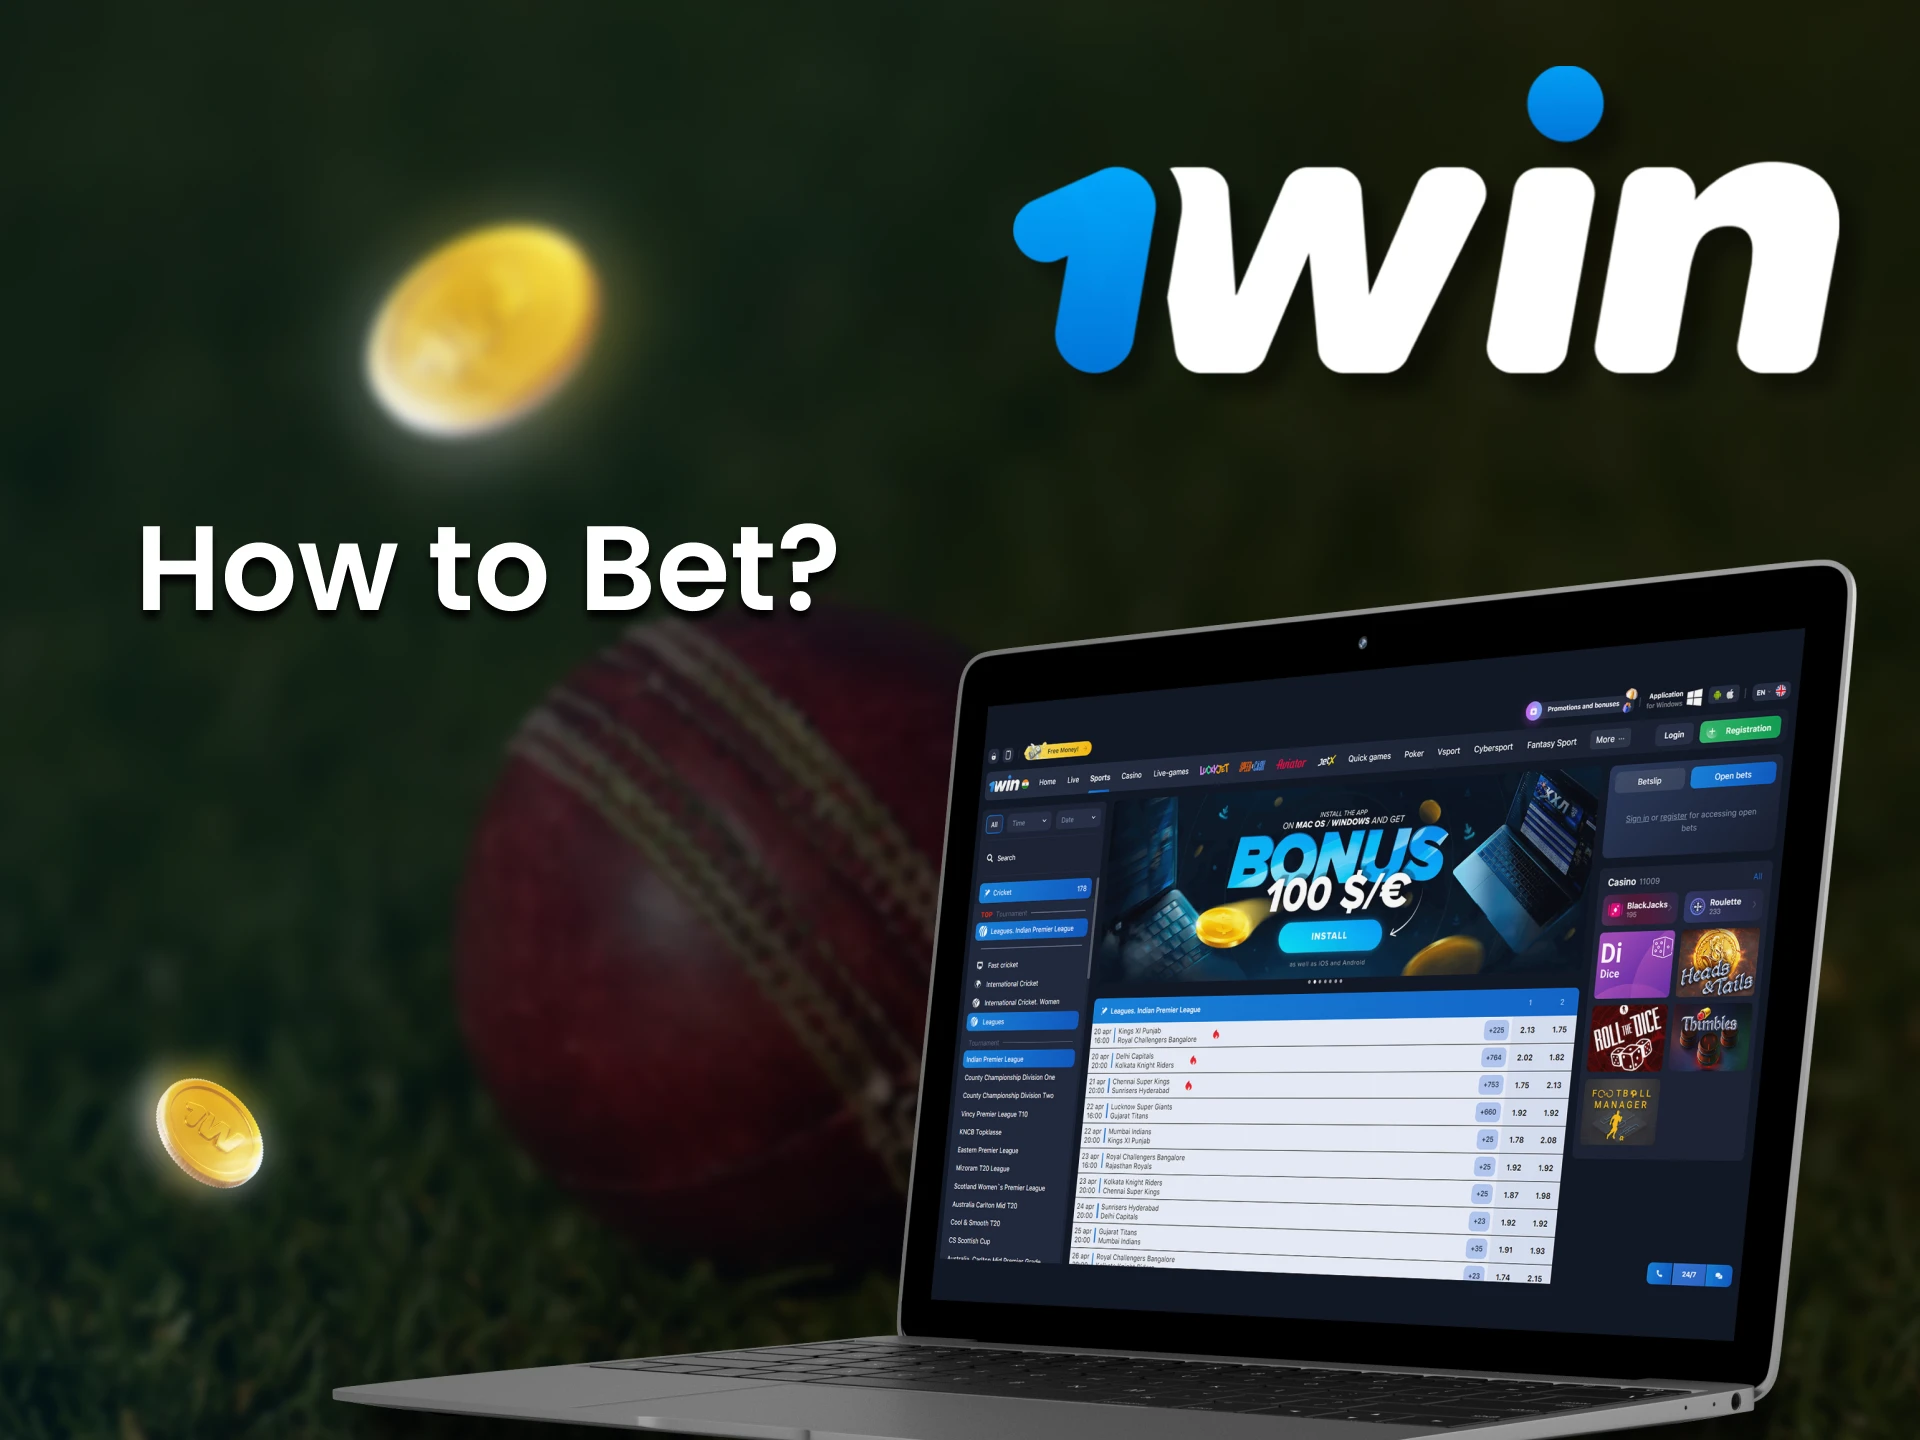 Go to the cricket section for betting on 1win.